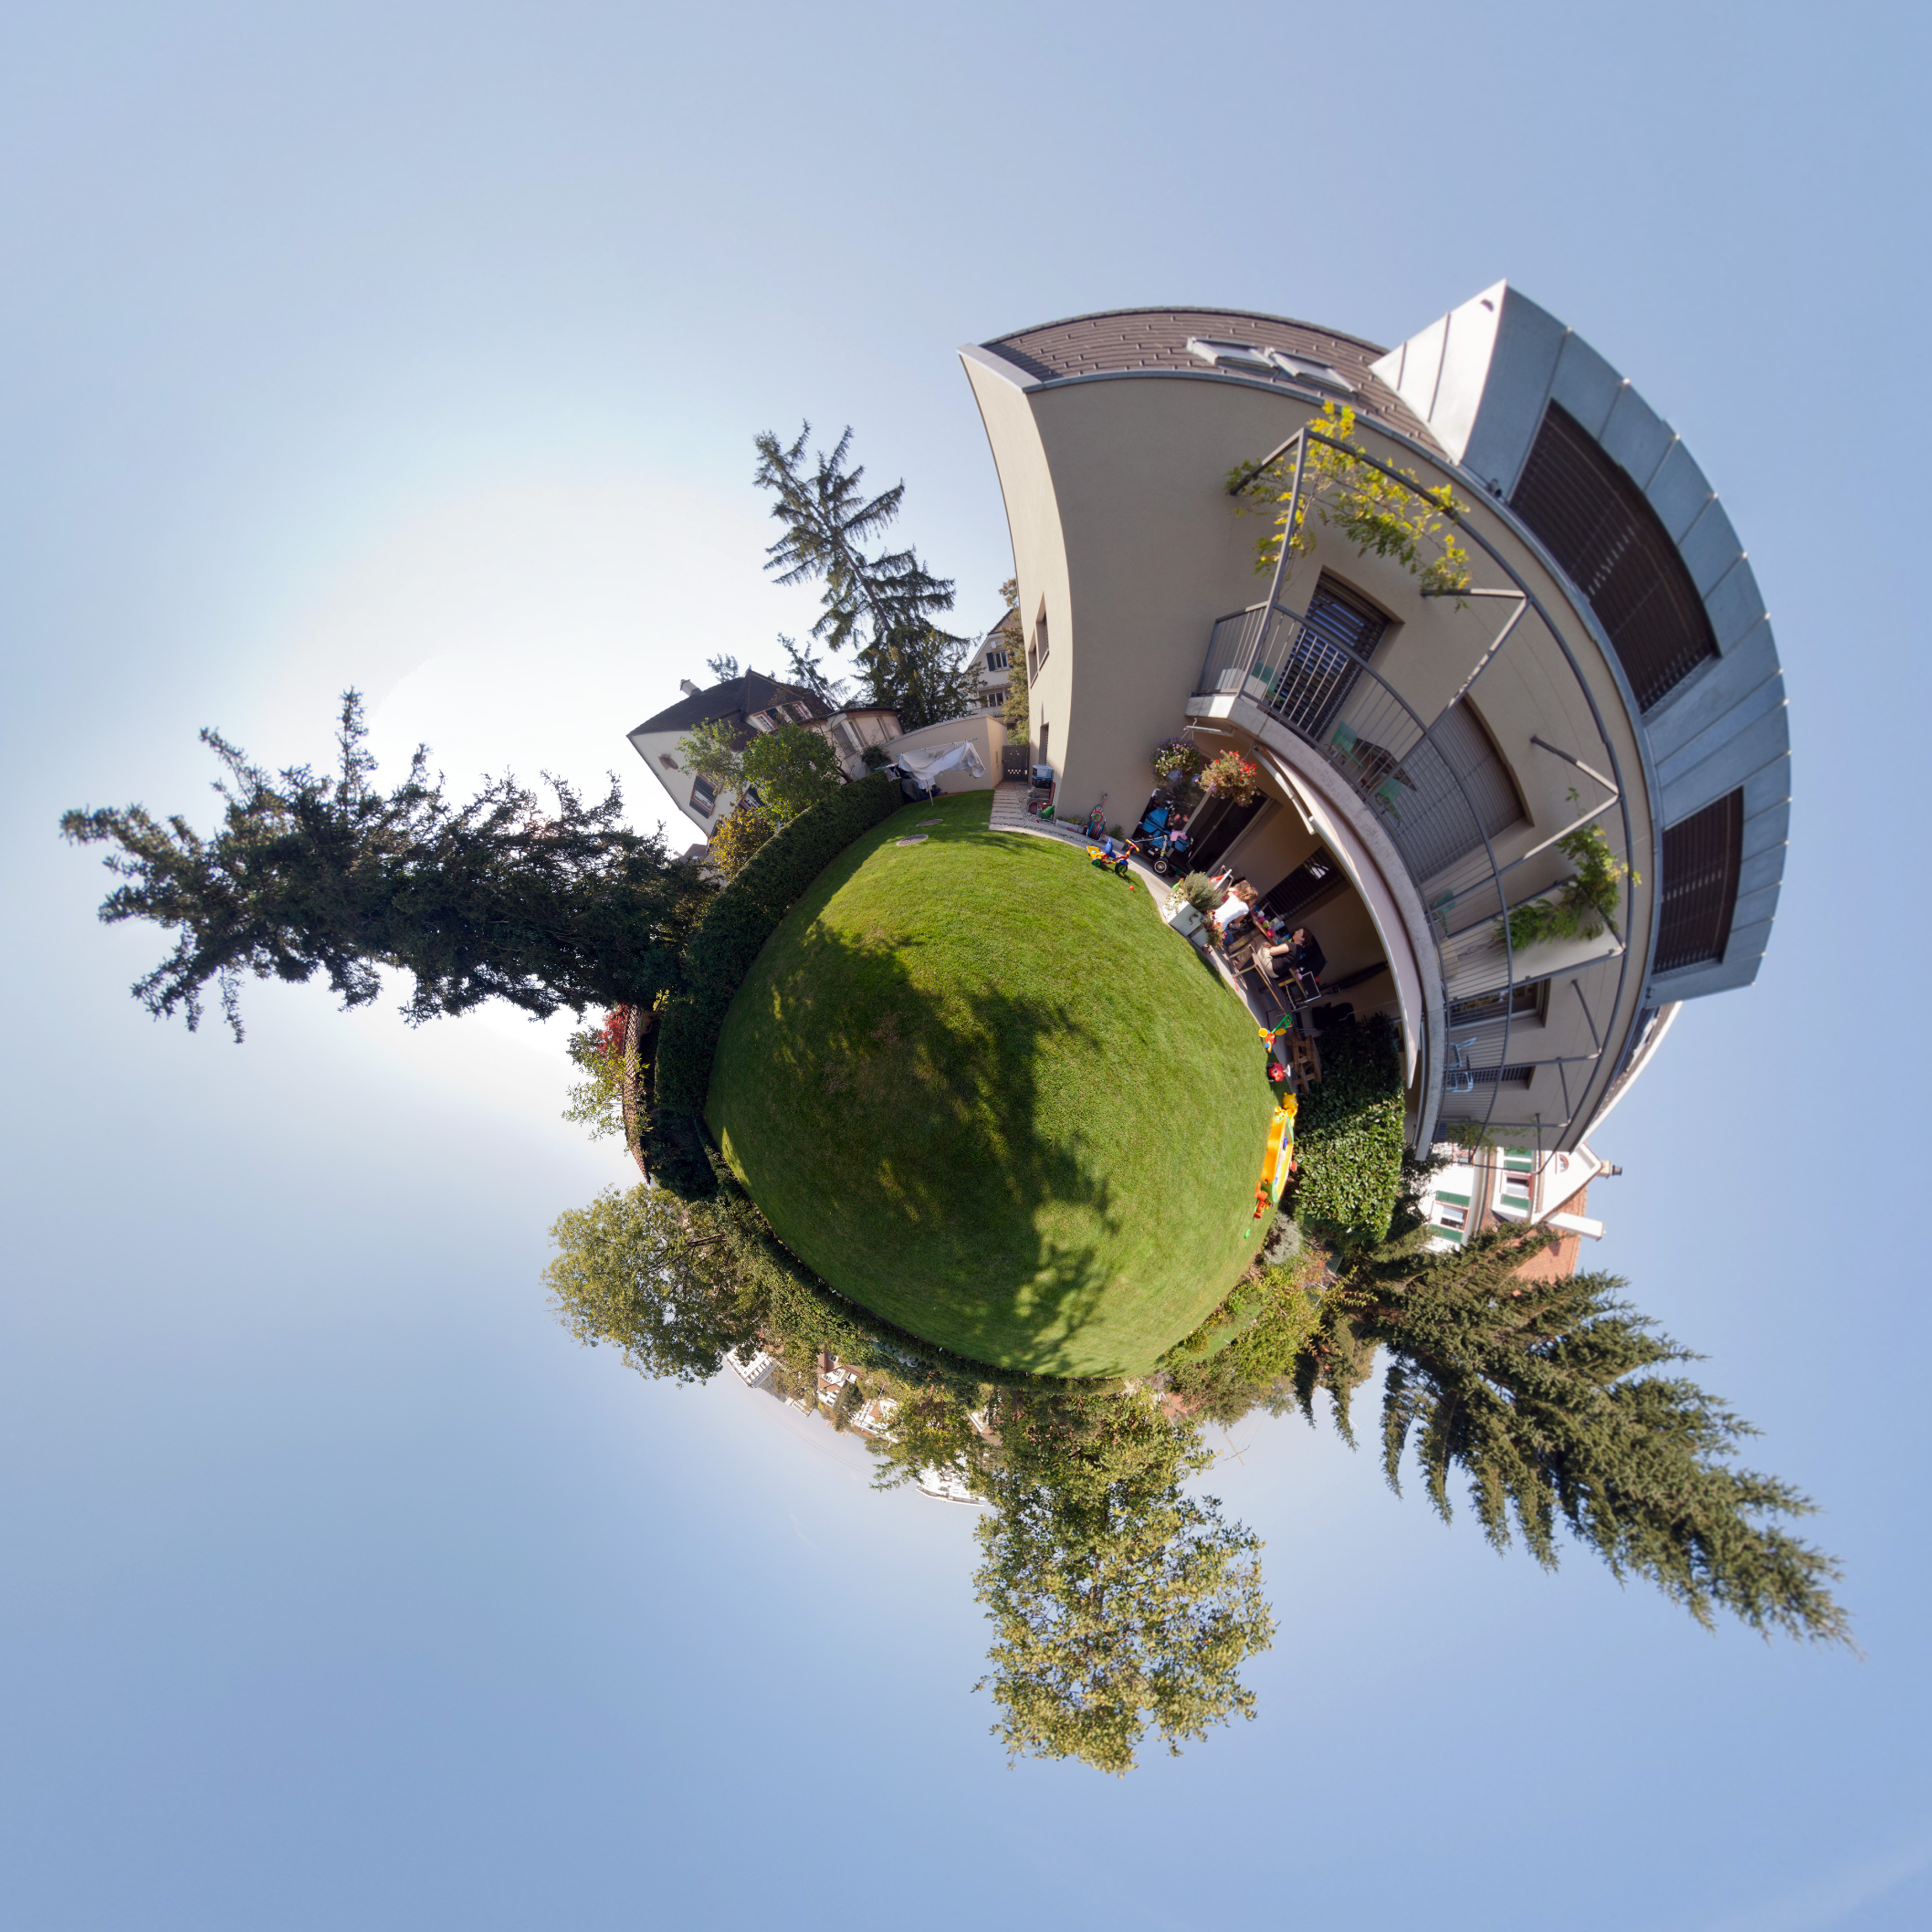 Panorama 090 - Little Planet